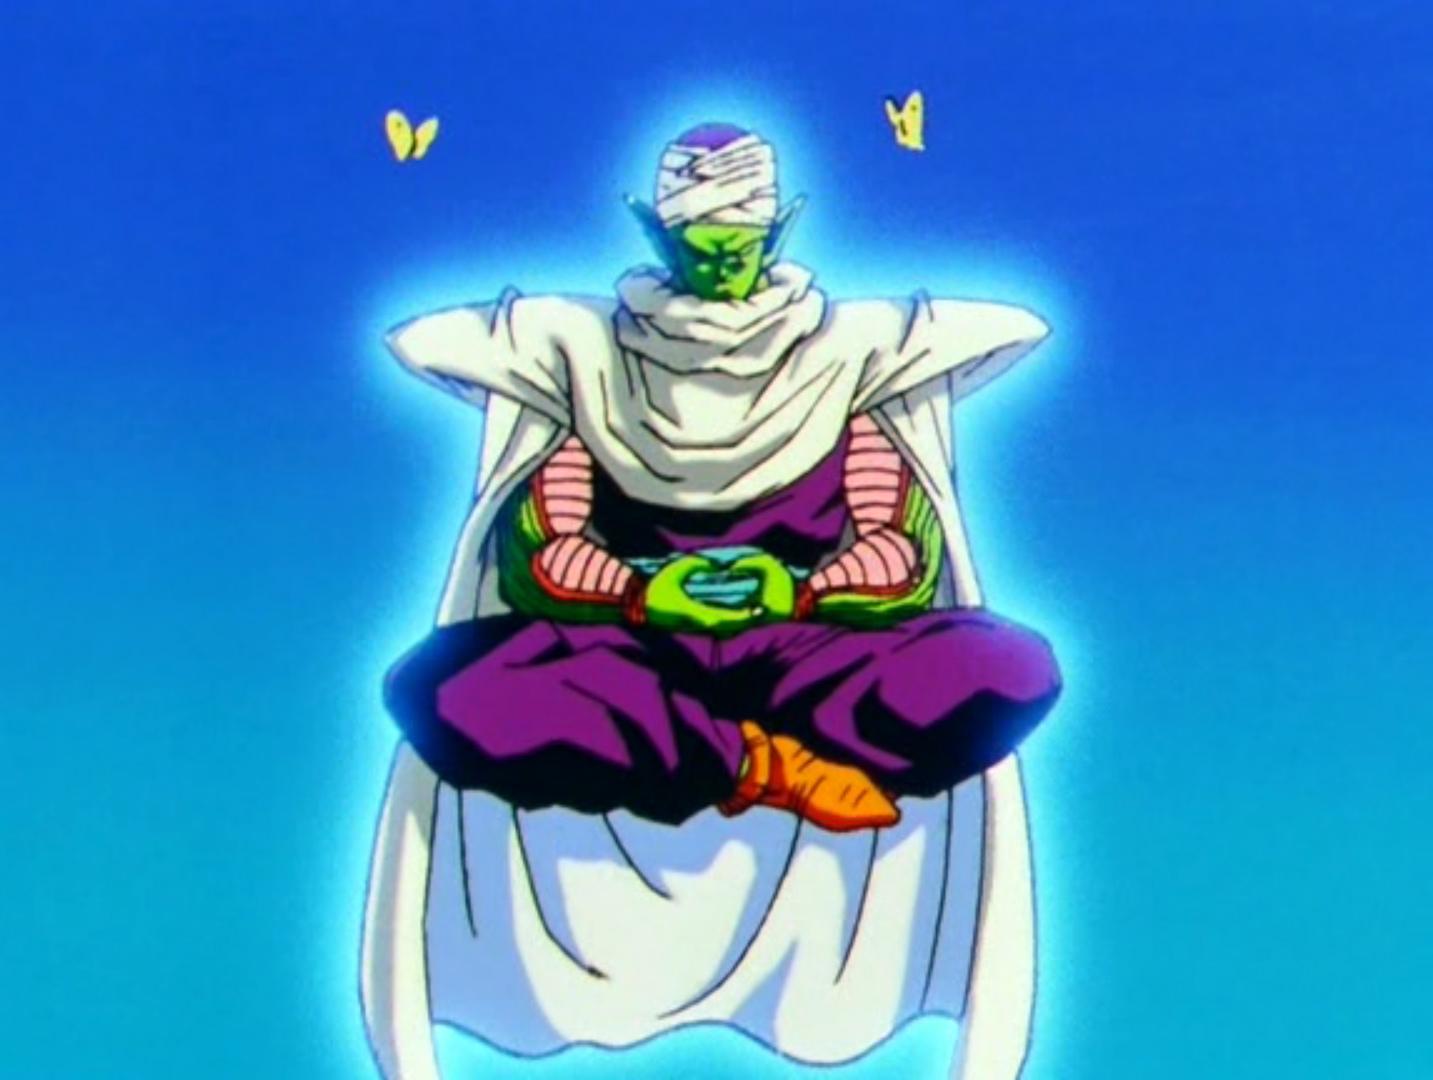 The Lotus Position in Anime And Manga. The Dao of Dragon Ball